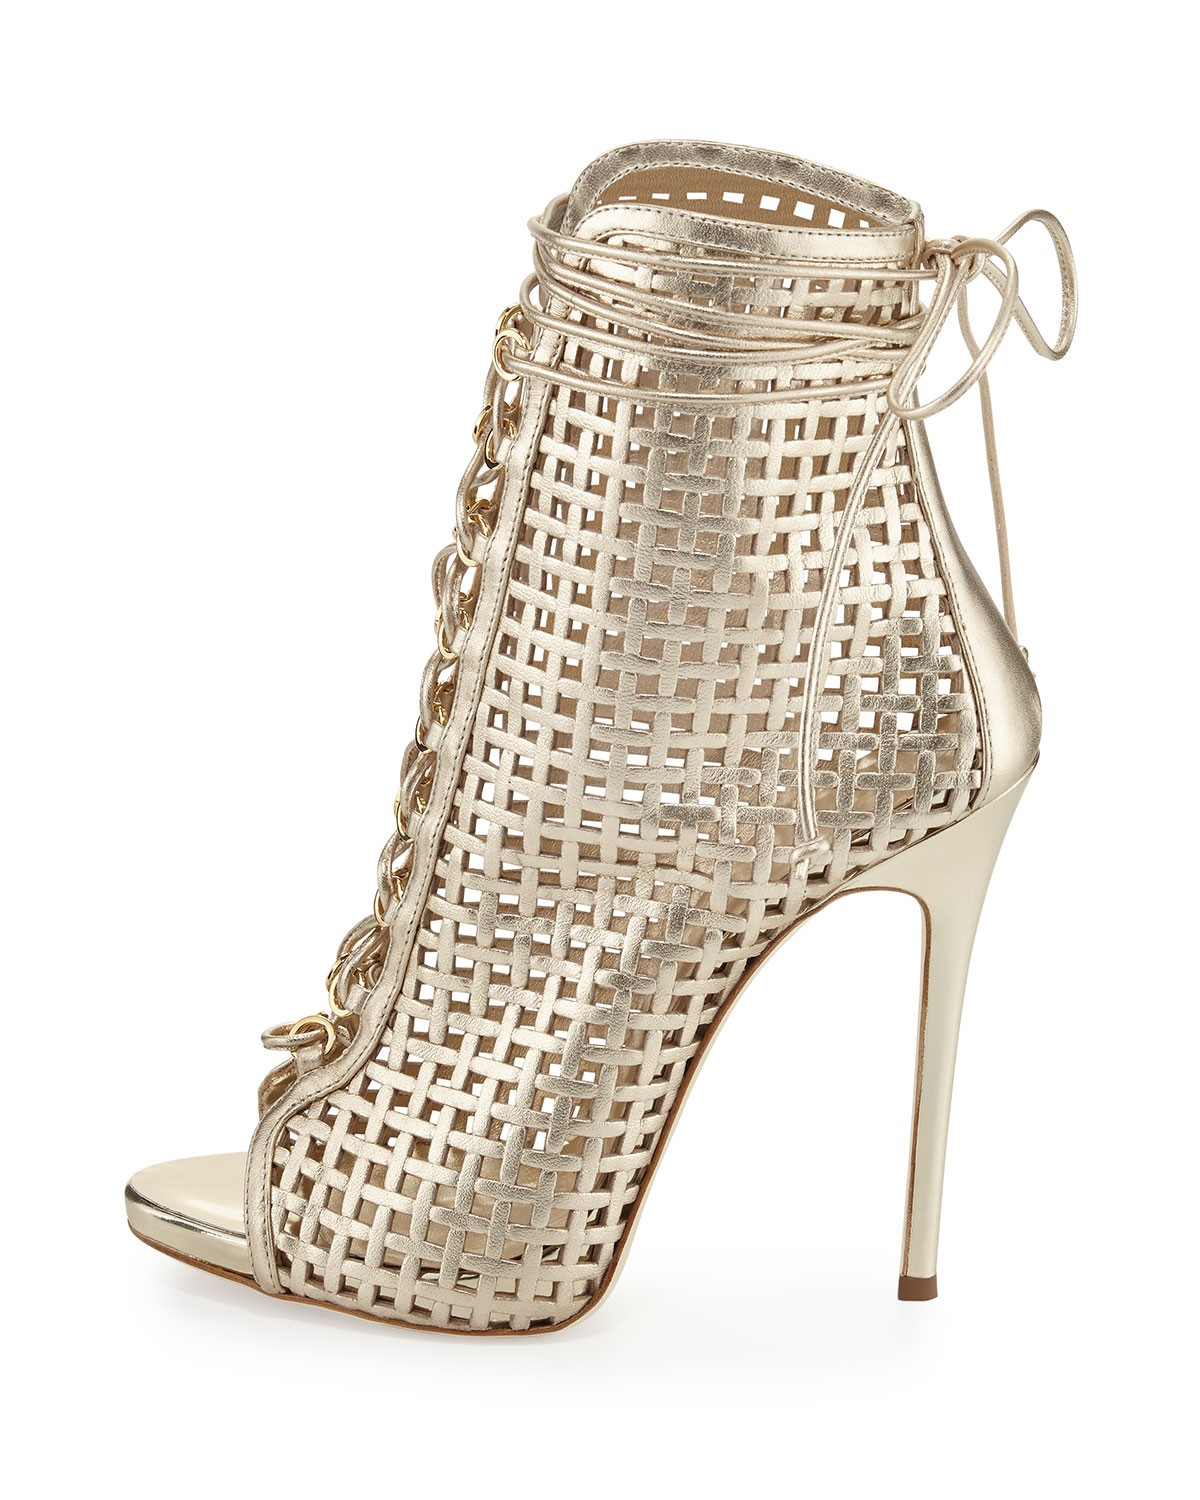 Giuseppe Zanotti Coline Caged 110mm Bootie, Gold – Shoes Post